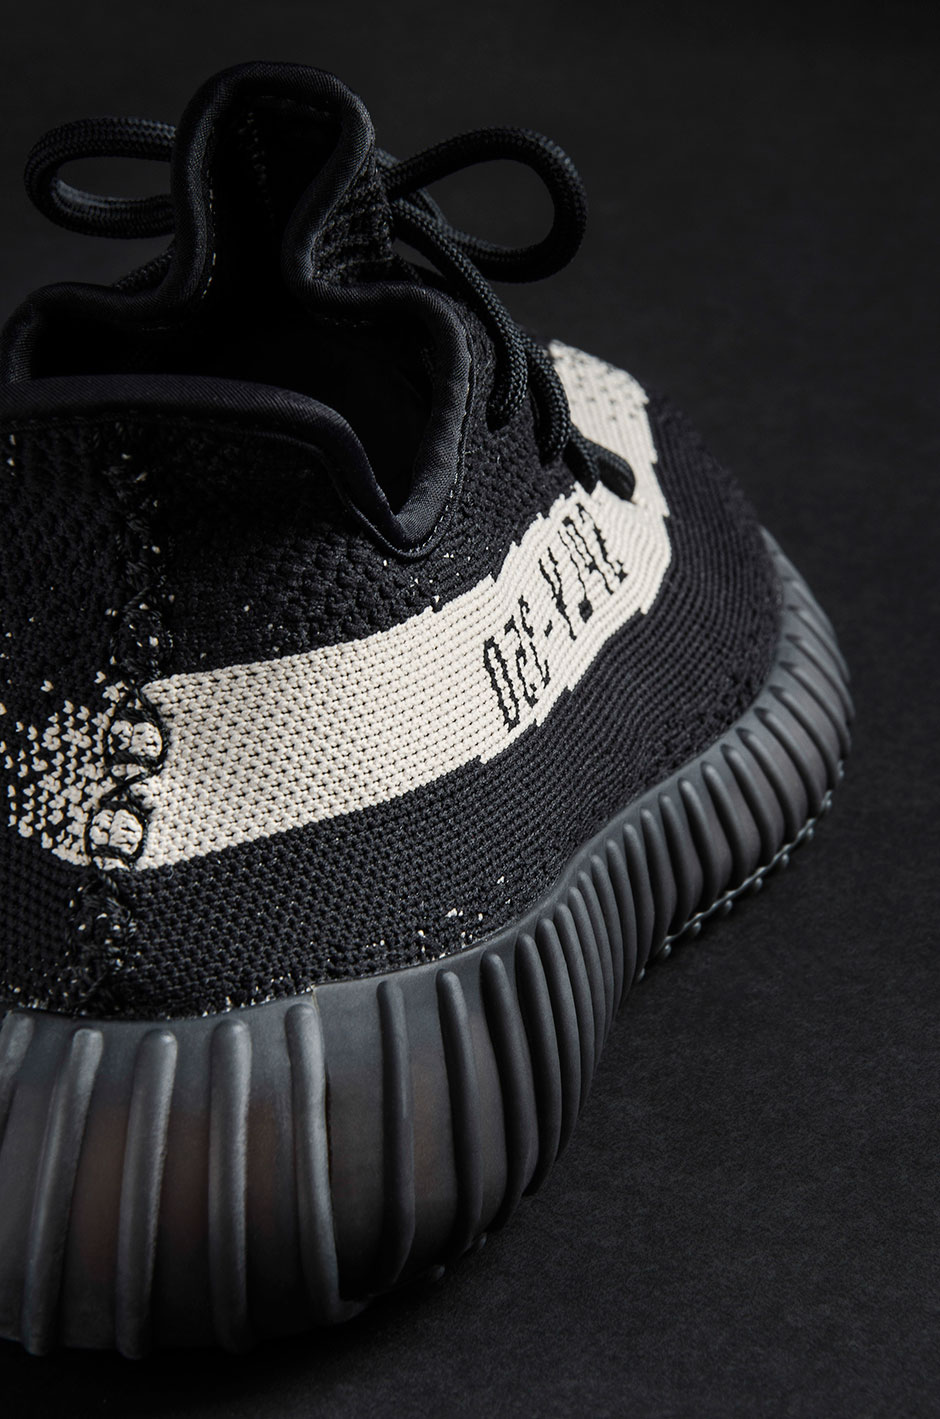 adidas x kanye west yeezy boost 350 v2 by1604